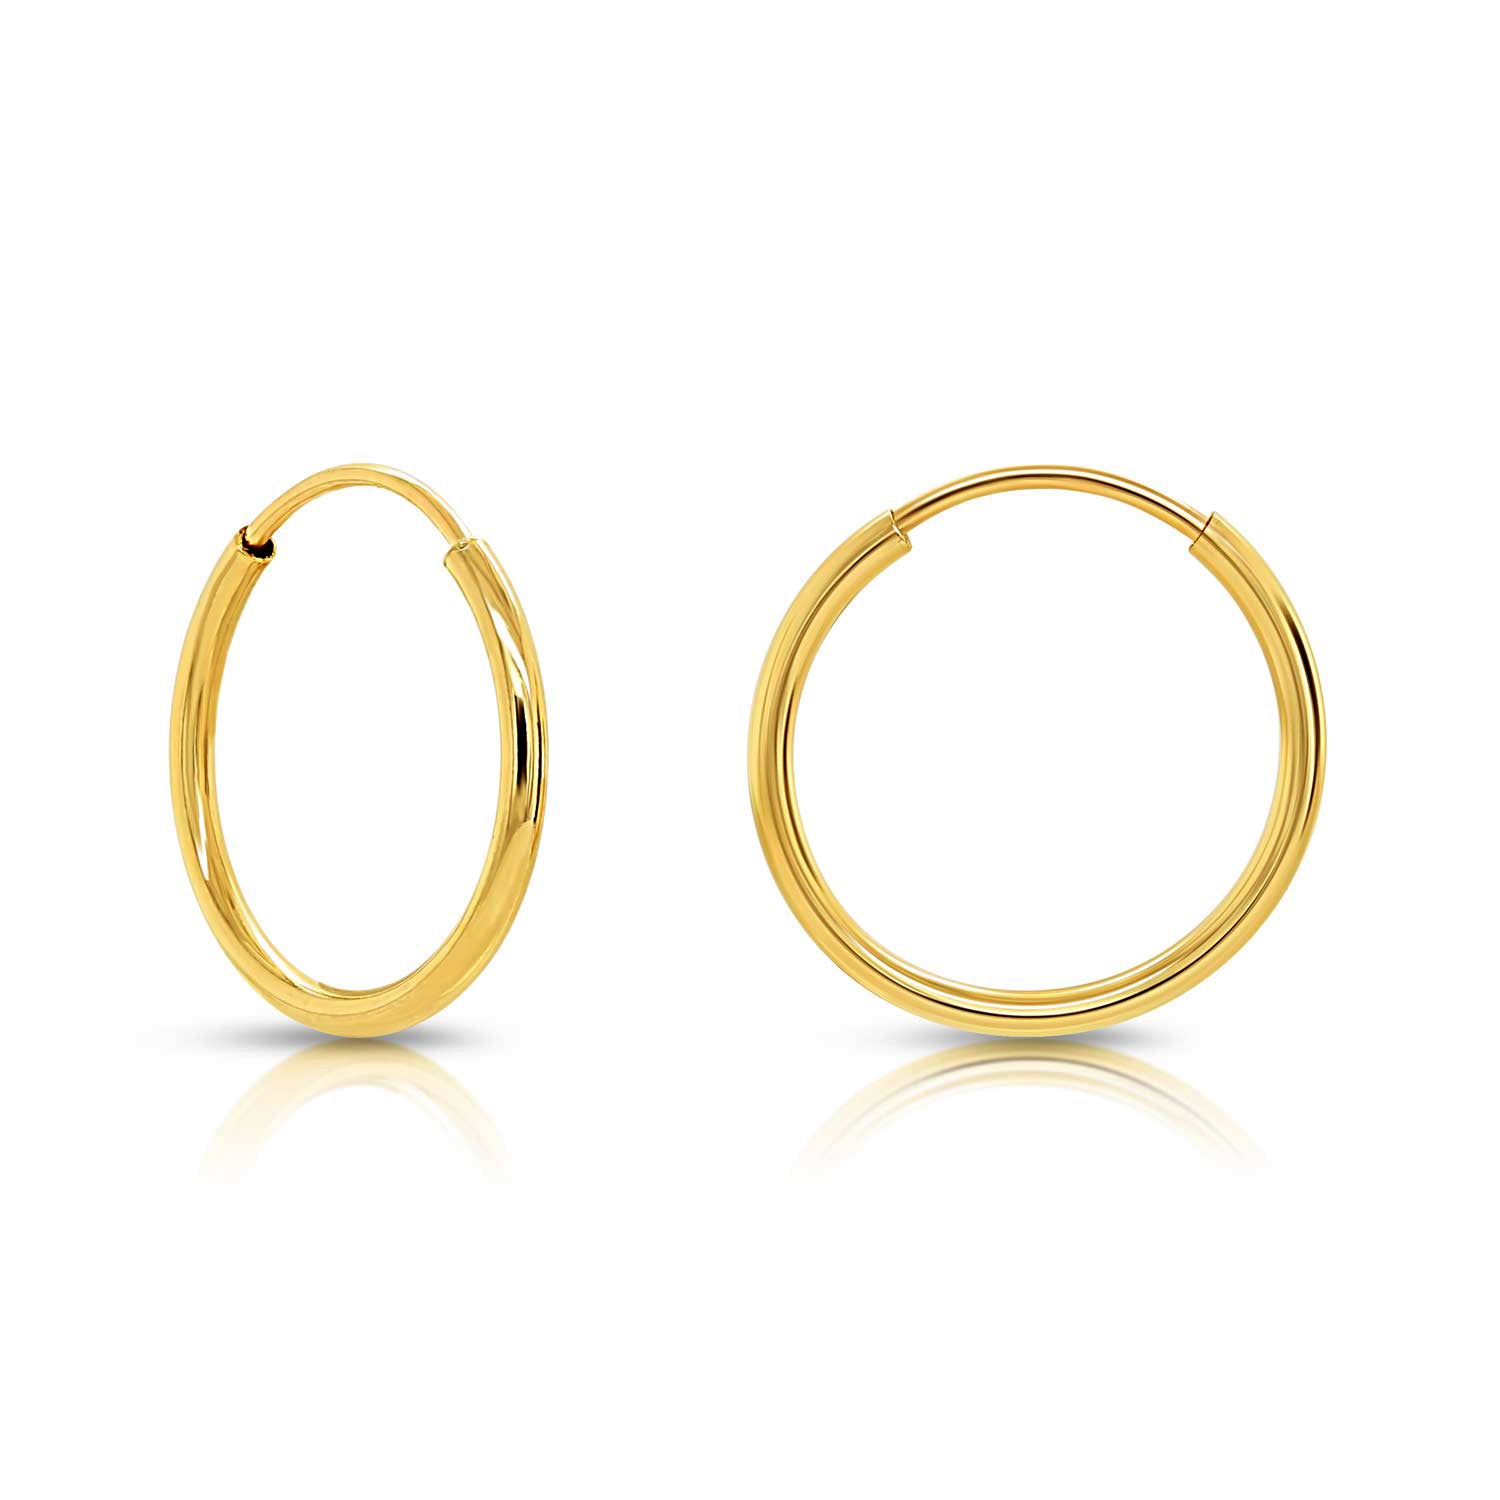 10k Yellow Gold Shiny Endless Round Hoop Earrings